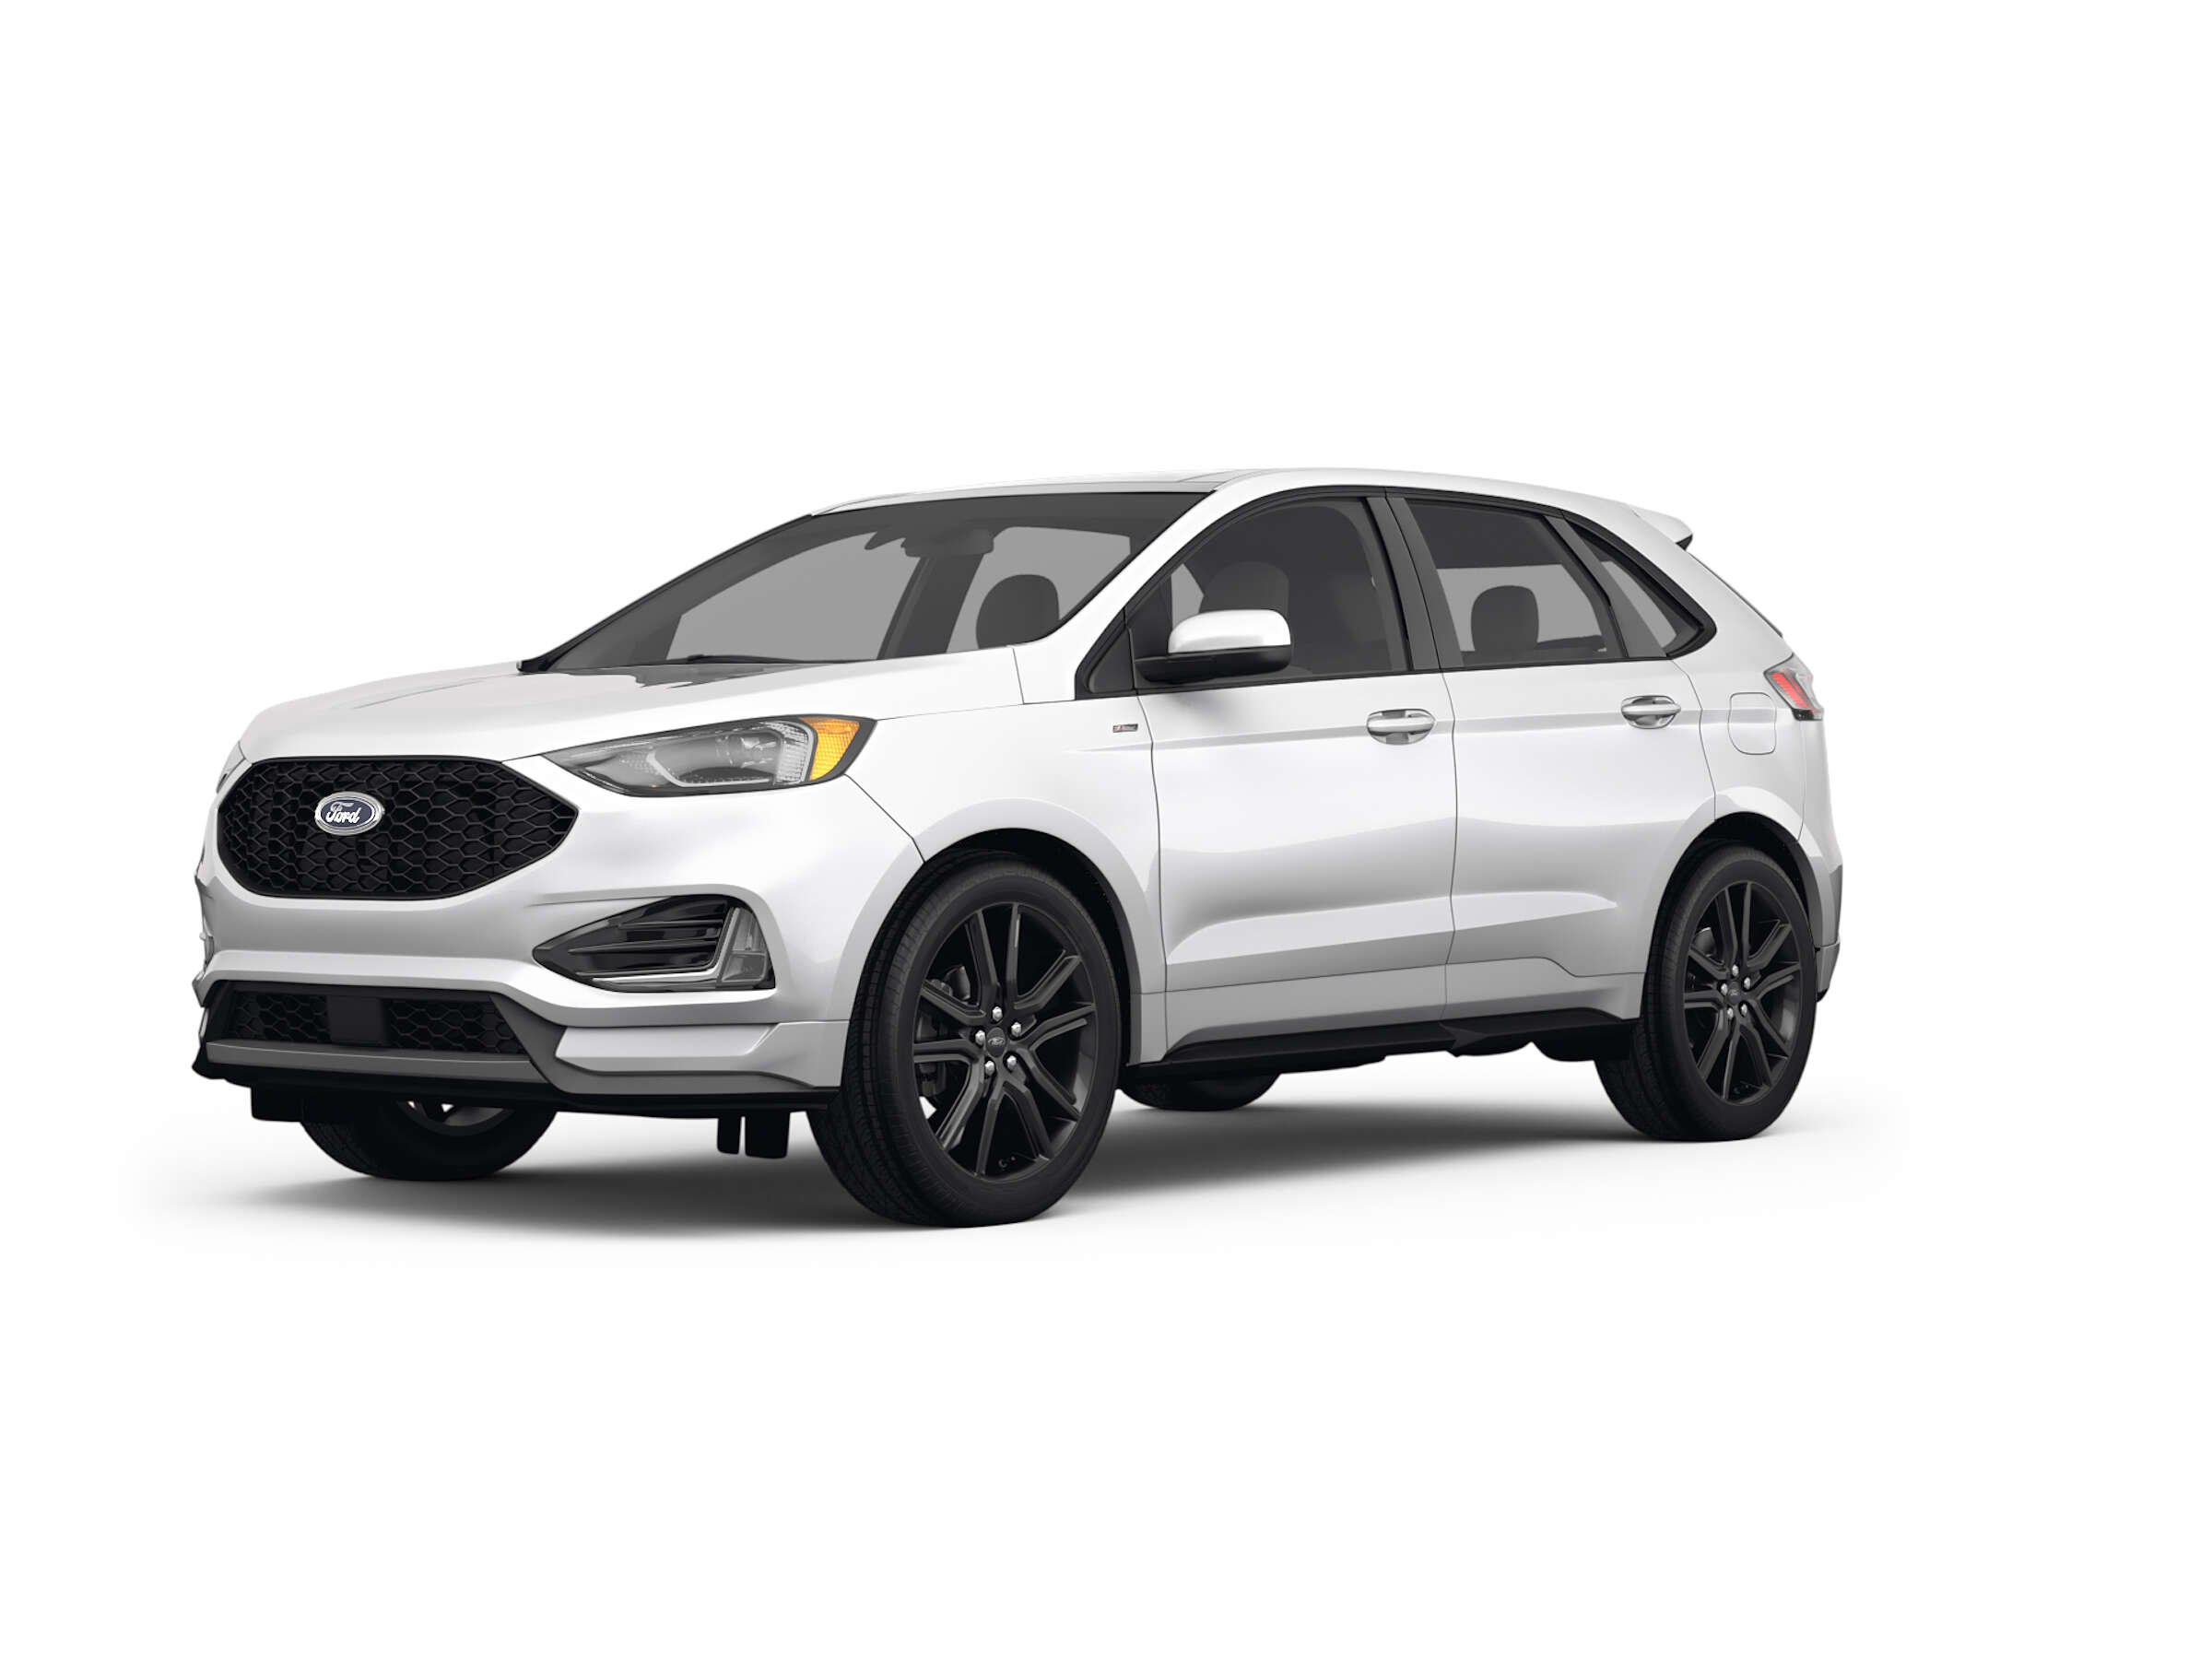 Ford Edge for sale in Charlotte, NC 